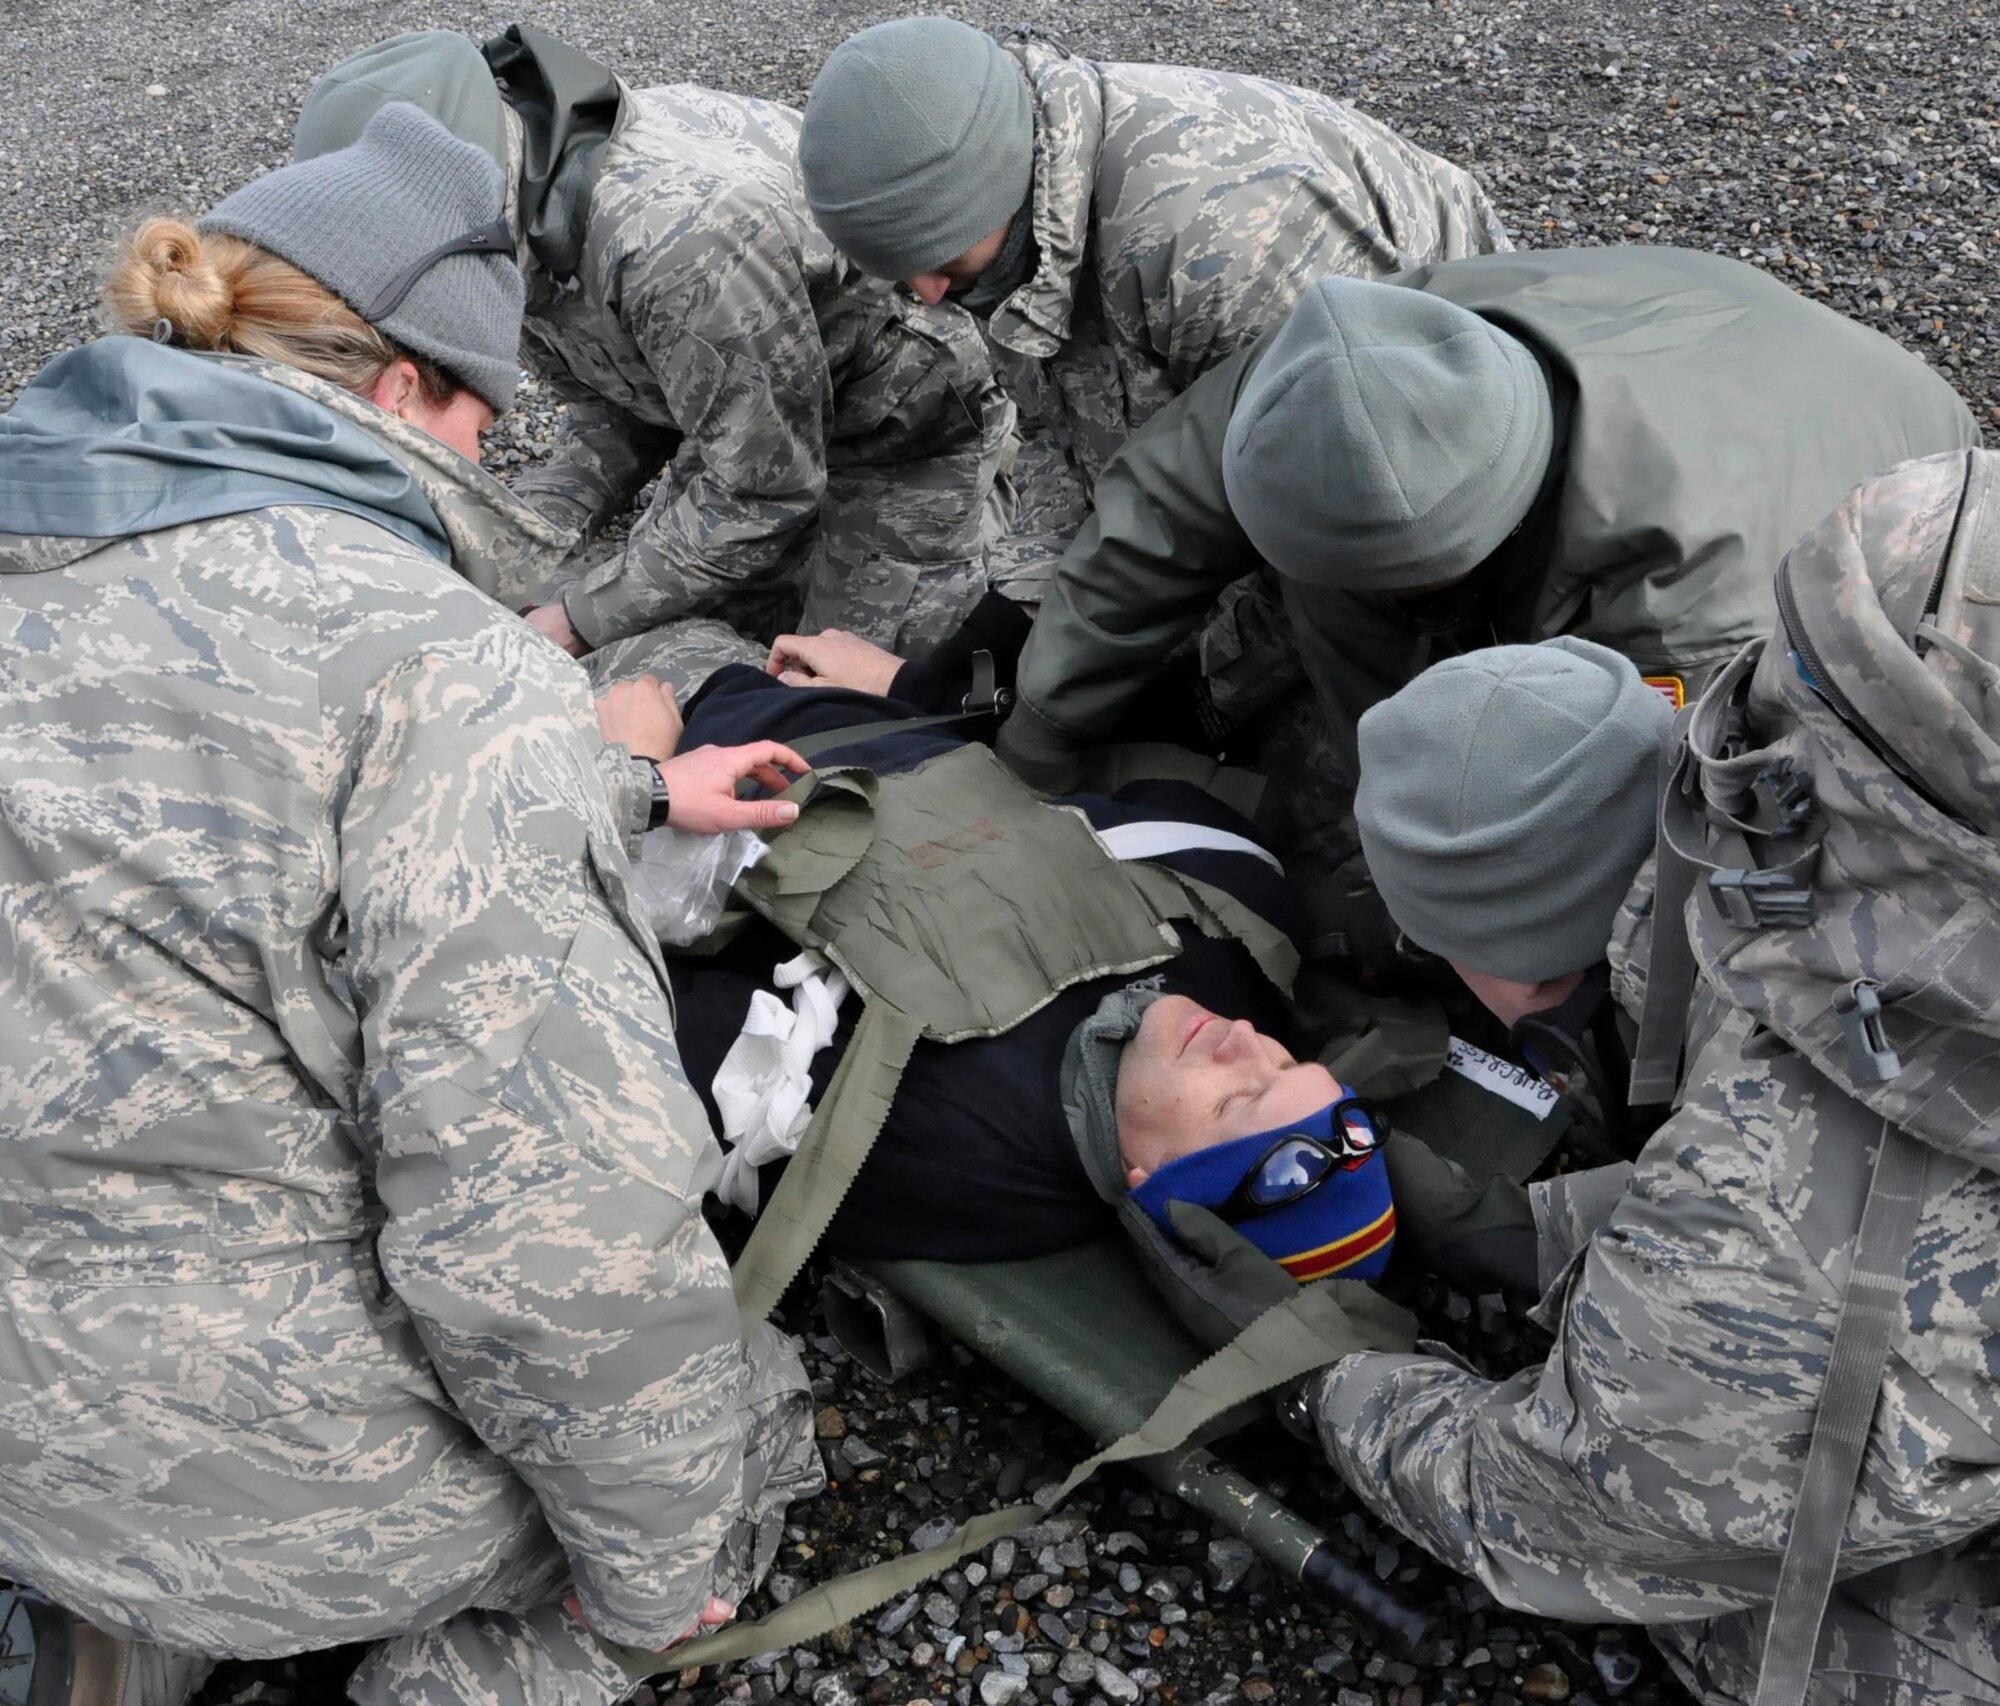 446th AES Reservists treat a simulated patient during an EMT refresher course on Fort Lewis, Wash. on Sunday, April 1st. Their unit is the only one in the Air Force with such a hands-on training curriculum to update their EMT skills.